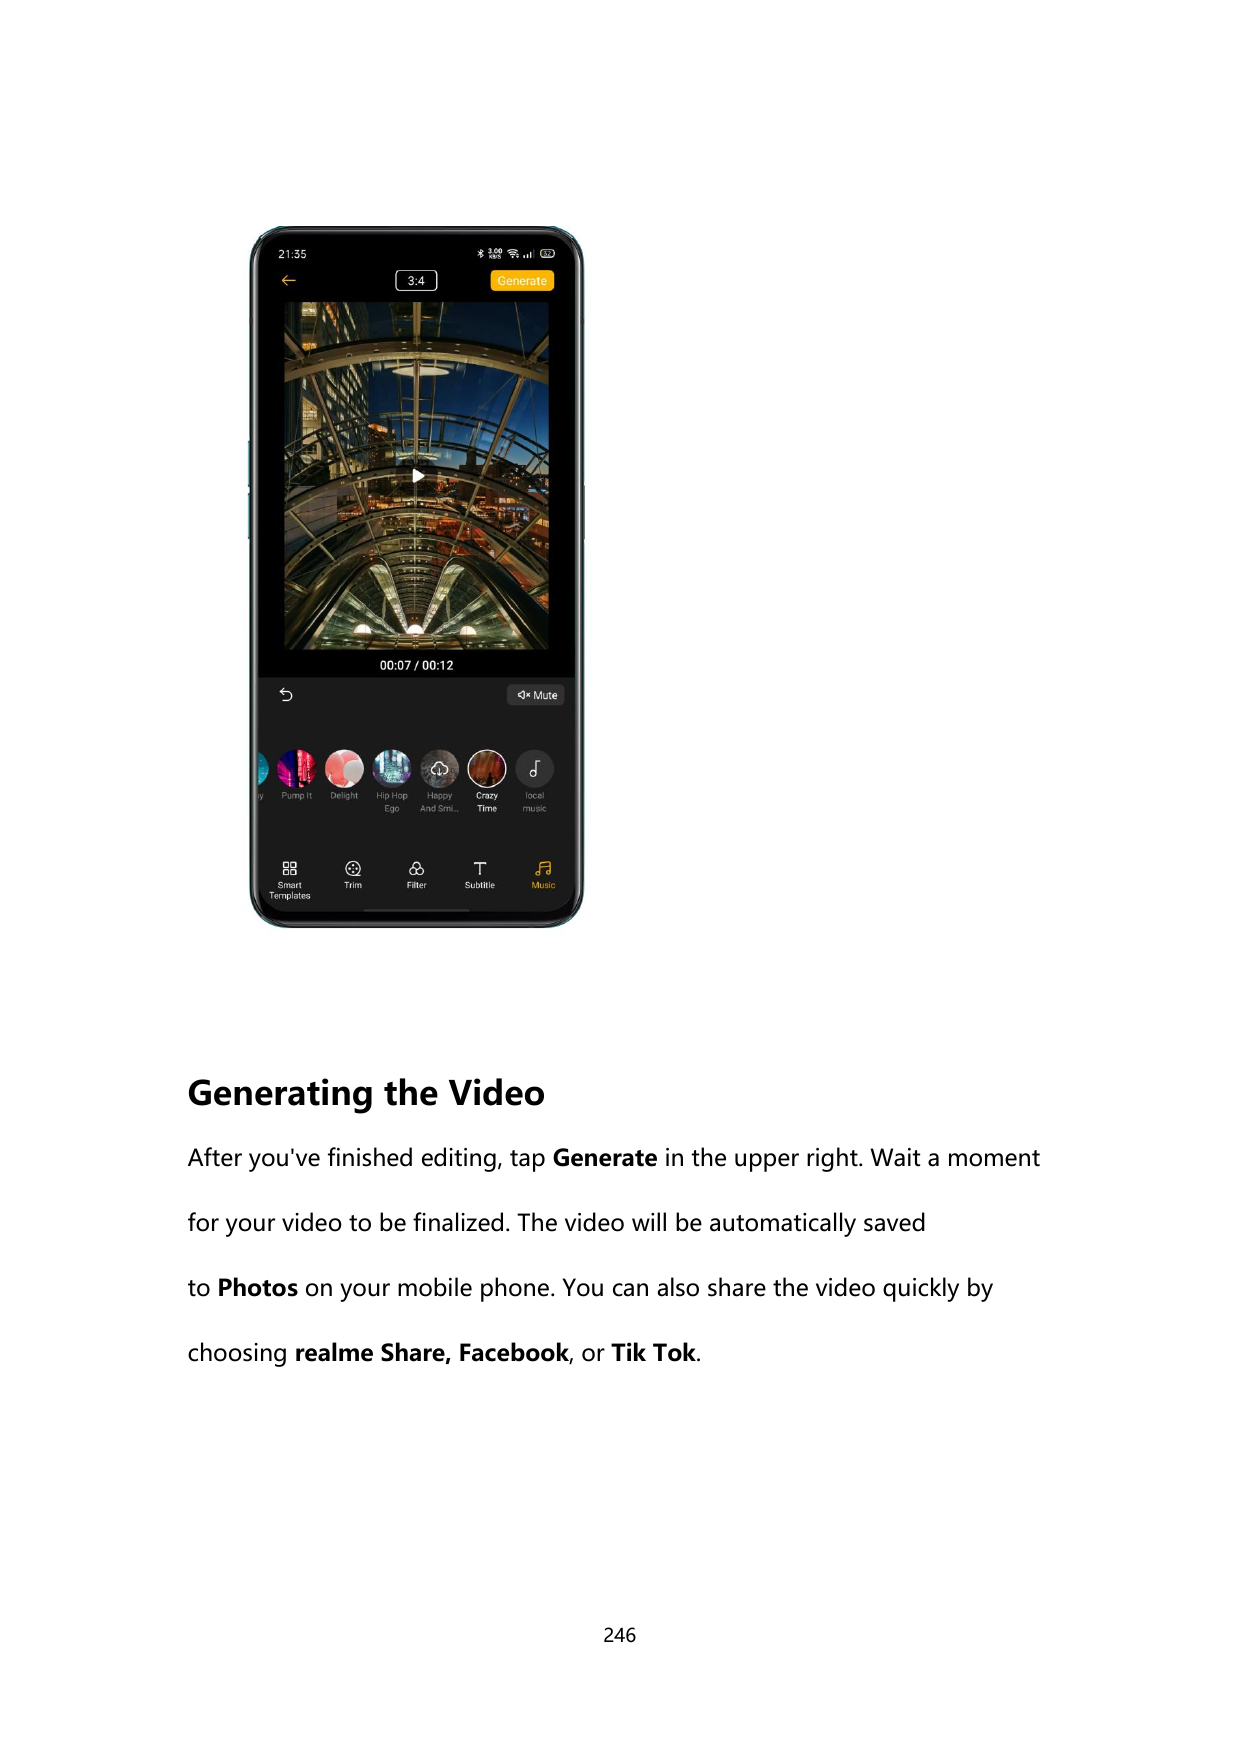 Generating the VideoAfter you've finished editing, tap Generate in the upper right. Wait a momentfor your video to be finalized.